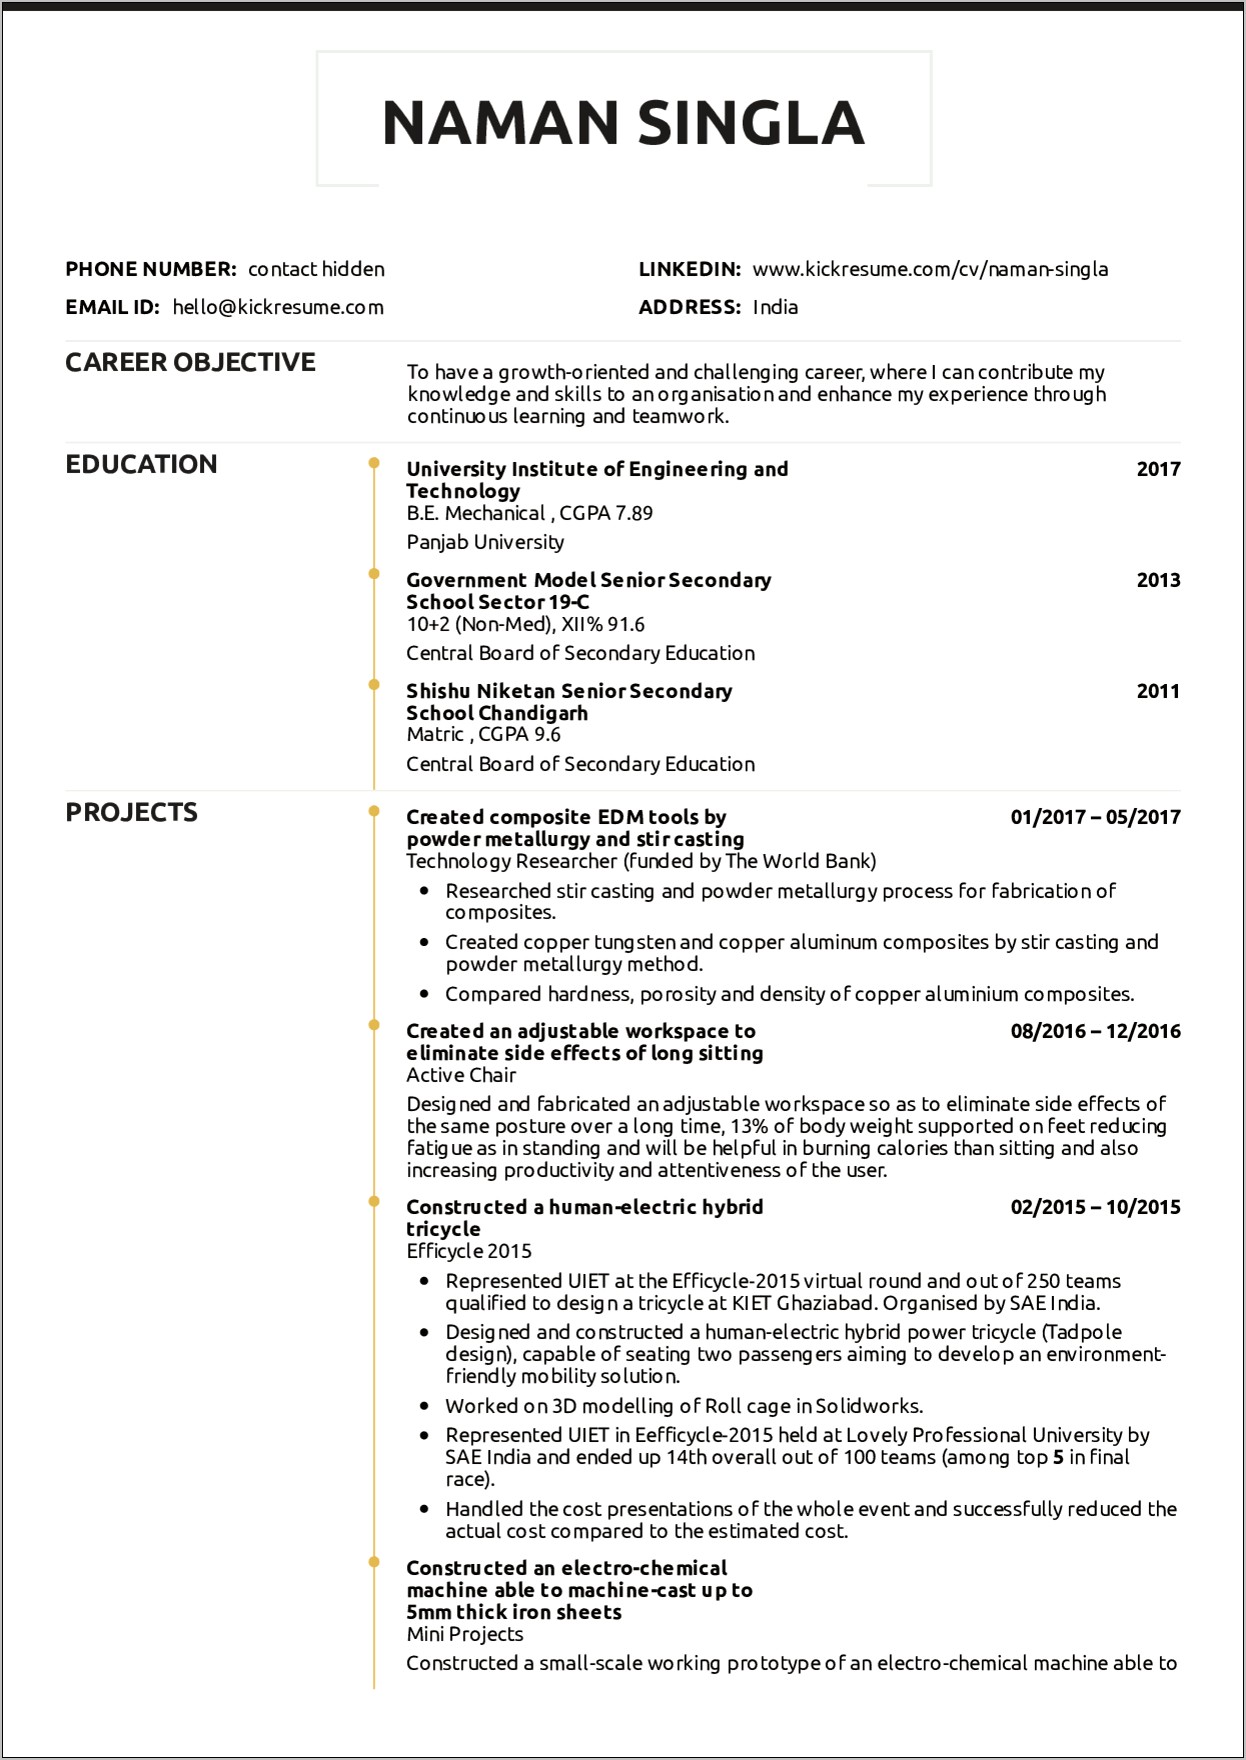 Bank Teller Resume Objective With No Experience